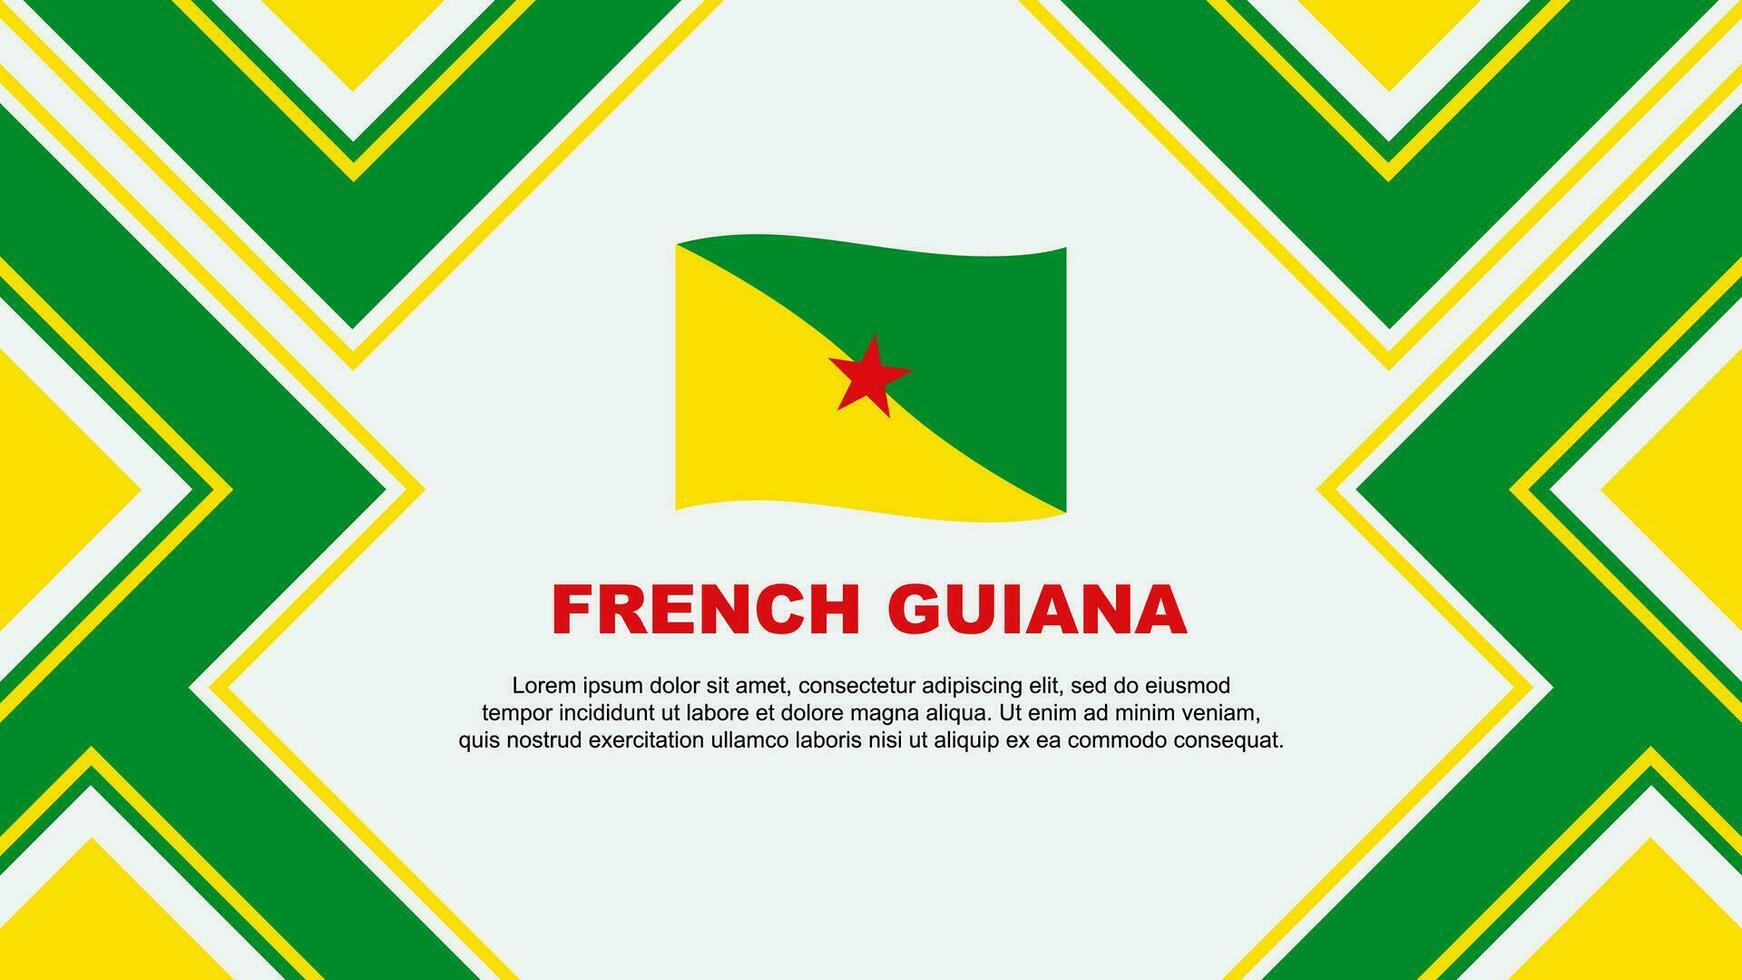 French Guiana Flag Abstract Background Design Template. French Guiana Independence Day Banner Wallpaper Vector Illustration. French Guiana Vector